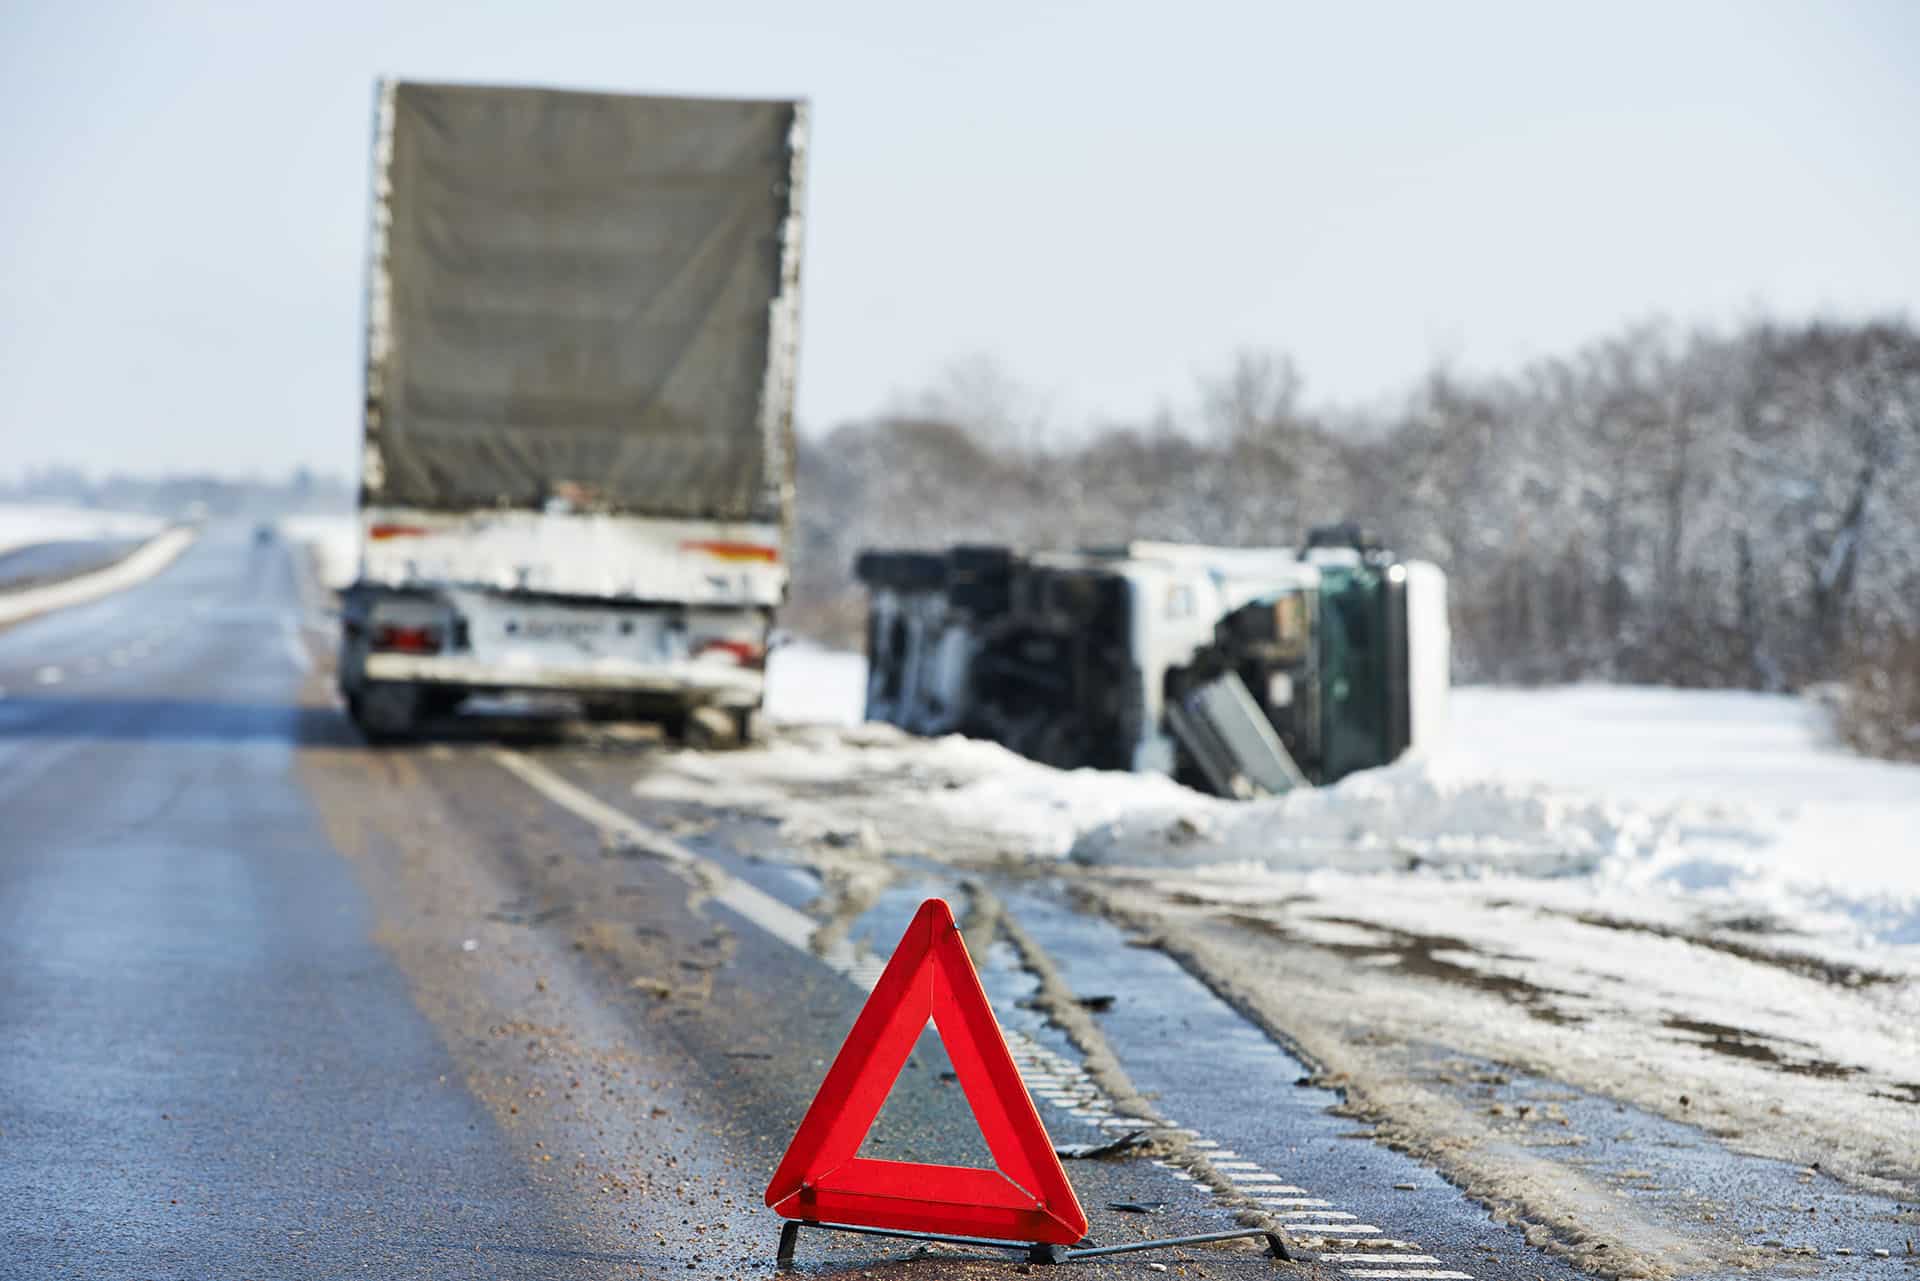 Lorry trailer car crash smash accident on an slippery winter snow interstate road